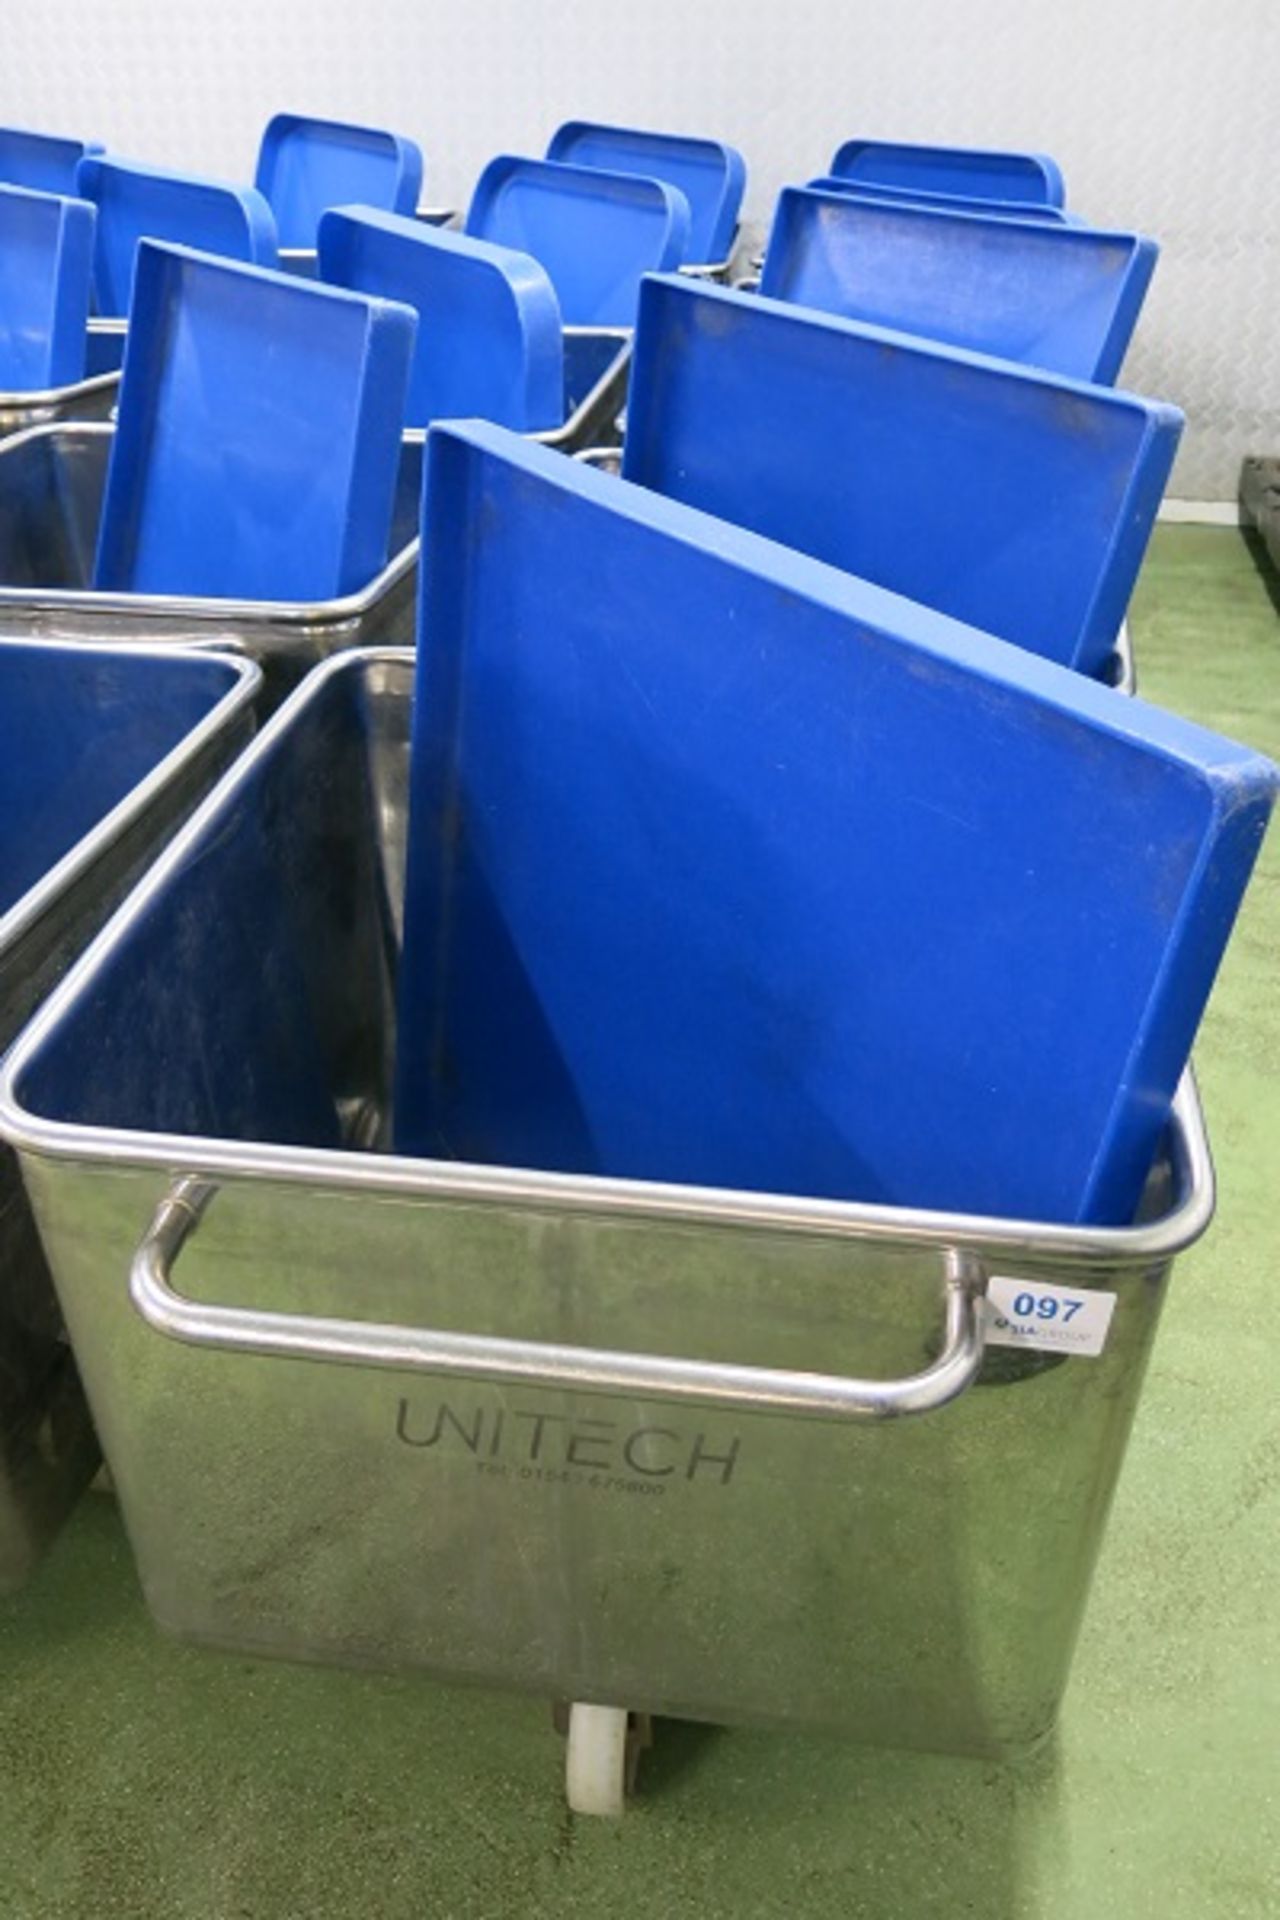 (5) Stainless steel Euro tote bins with blue plastic lids